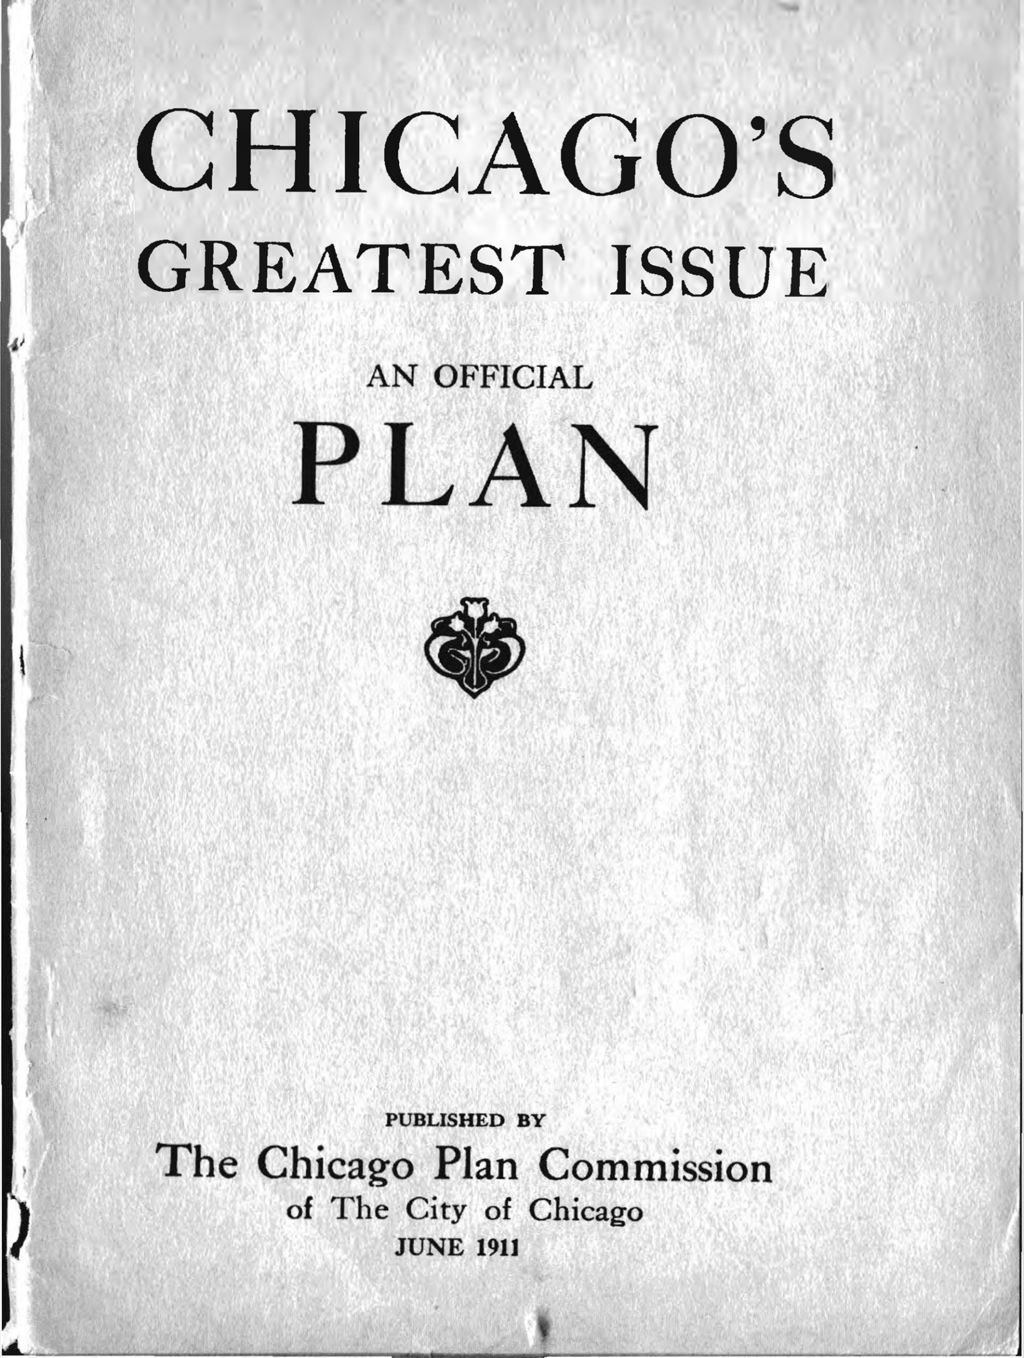 Miniature of Chicago's Greatest Issue: An Official Plan